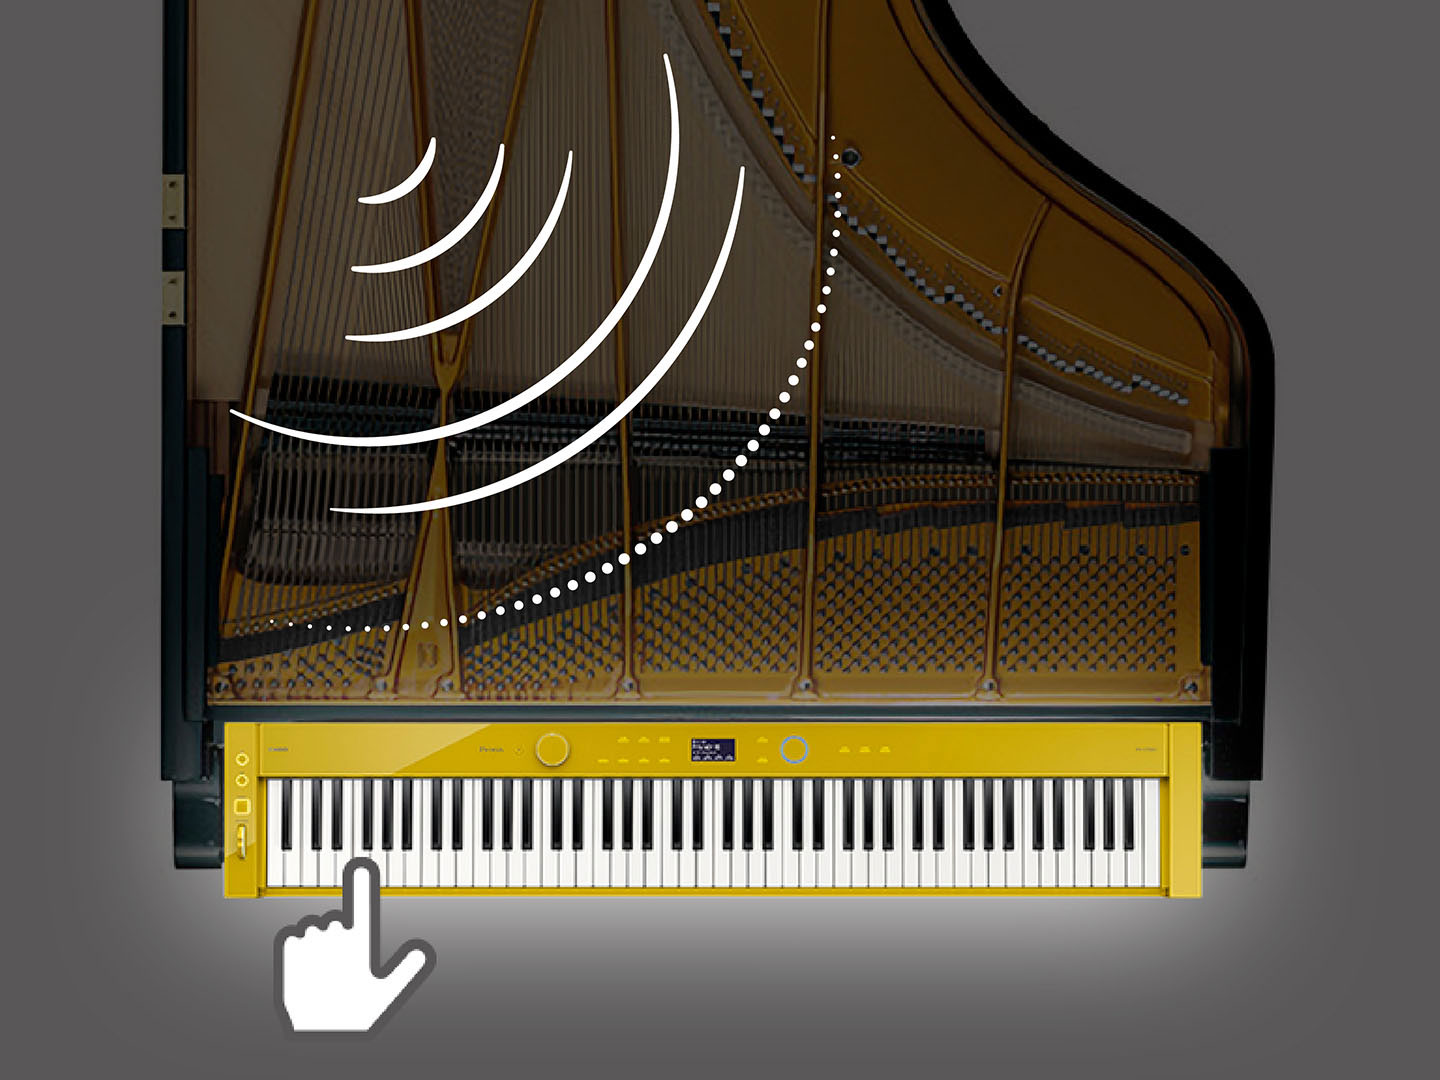 The finely balanced sound and precise localization of a grand piano.